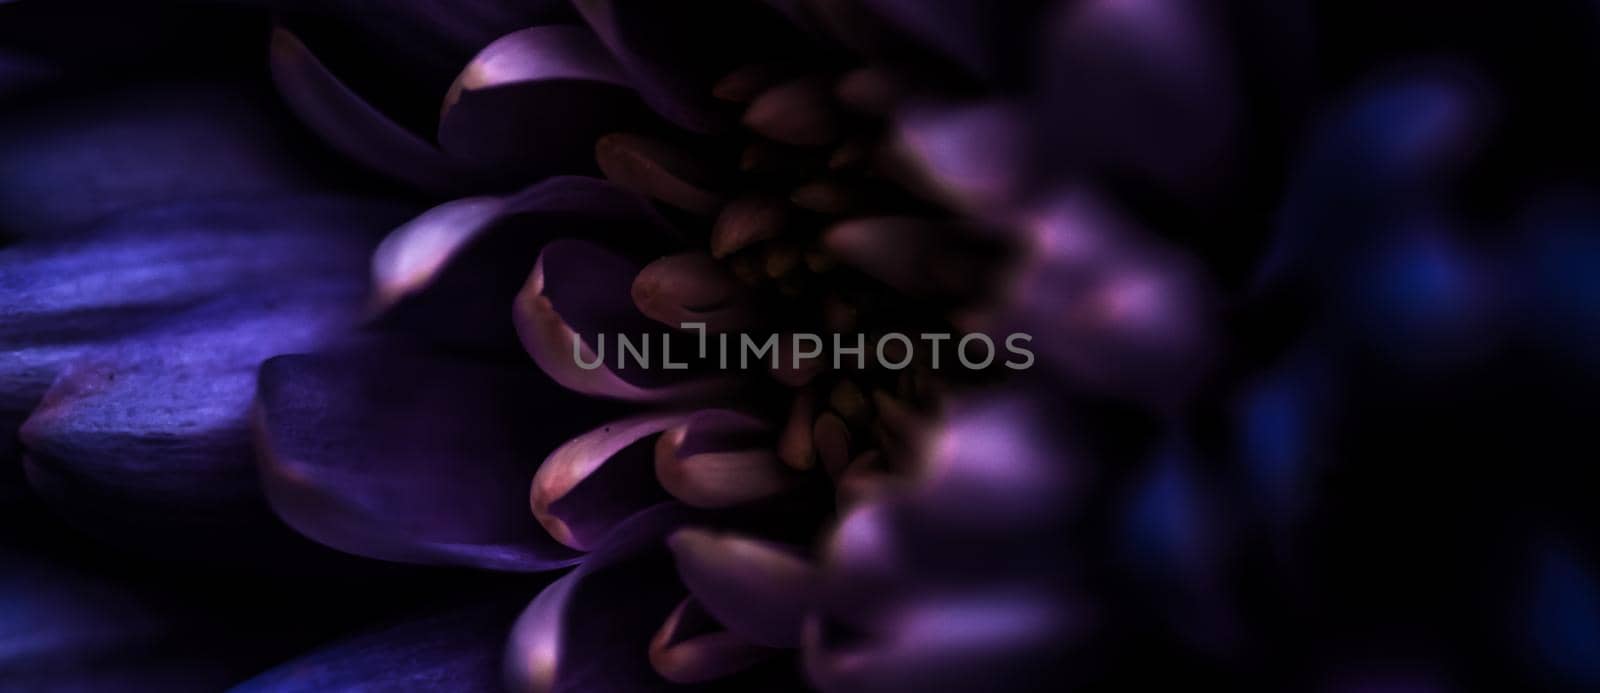 Flora, branding and love concept - Purple daisy flower petals in bloom, abstract floral blossom art background, flowers in spring nature for perfume scent, wedding, luxury beauty brand holiday design